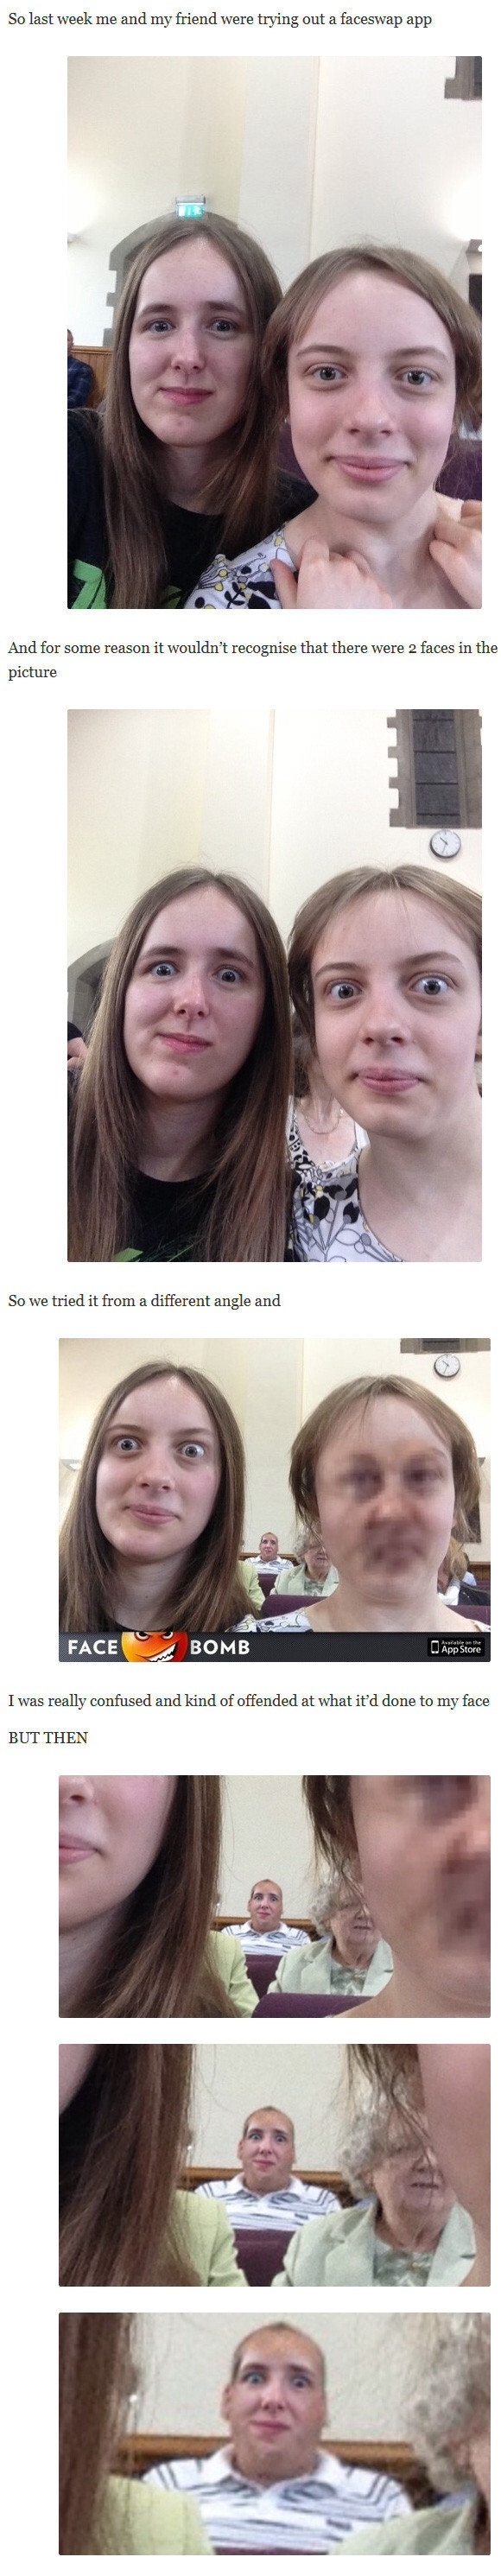 Face-Swapping gone wrong